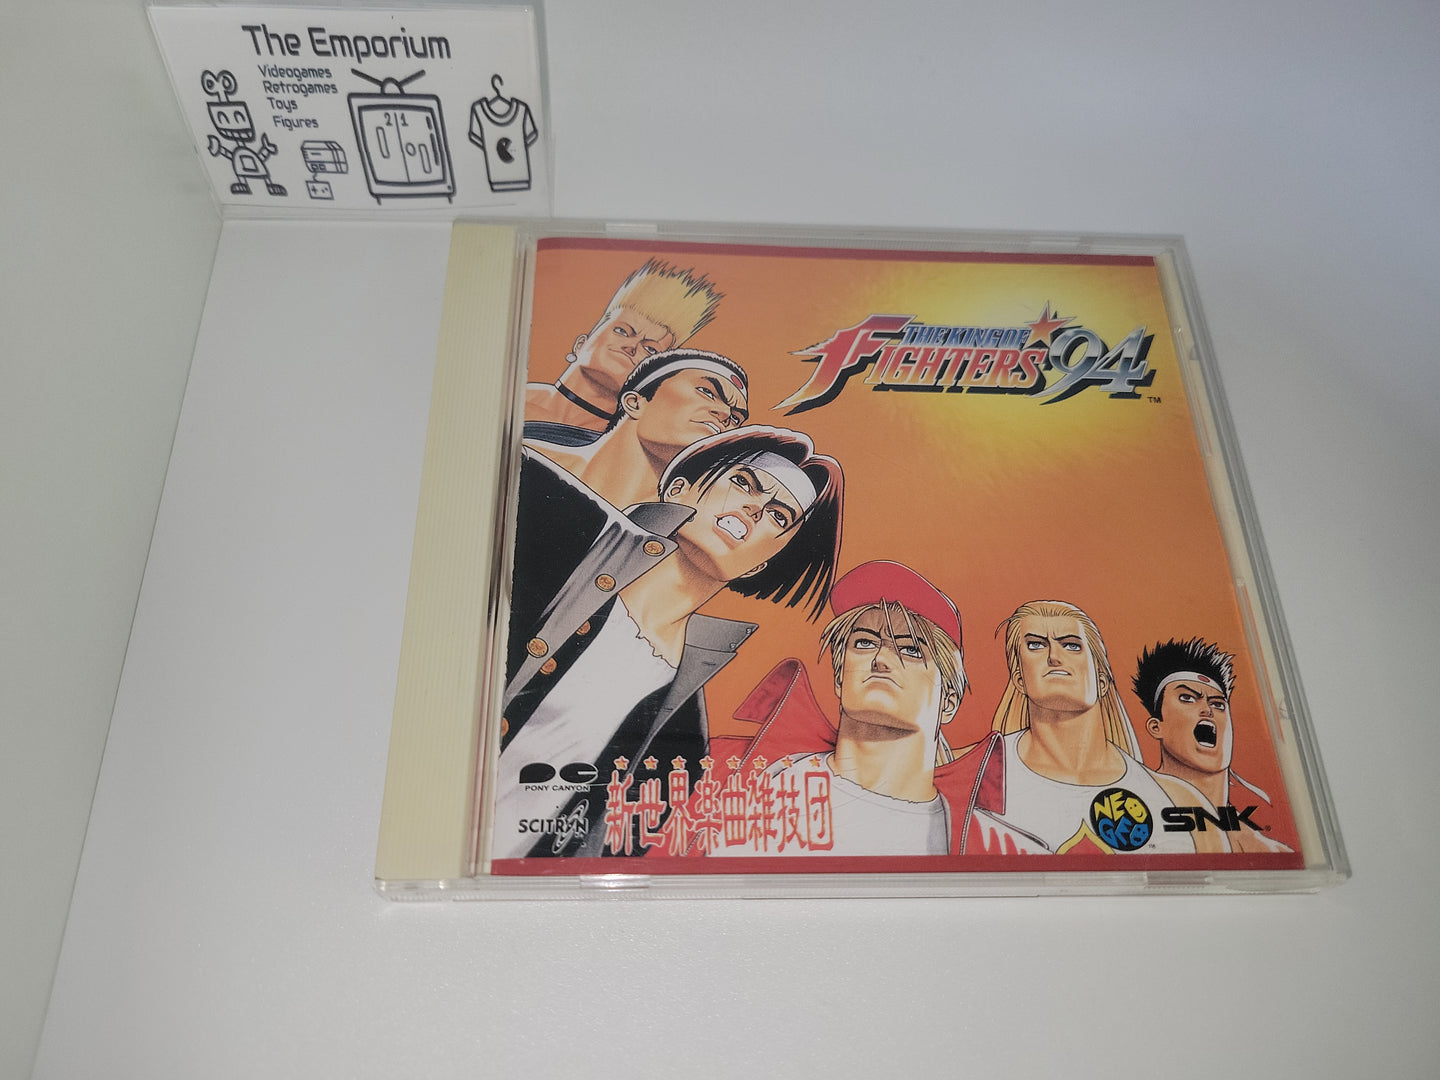 THE KING OF FIGHTERS '94 - Music cd soundtrack